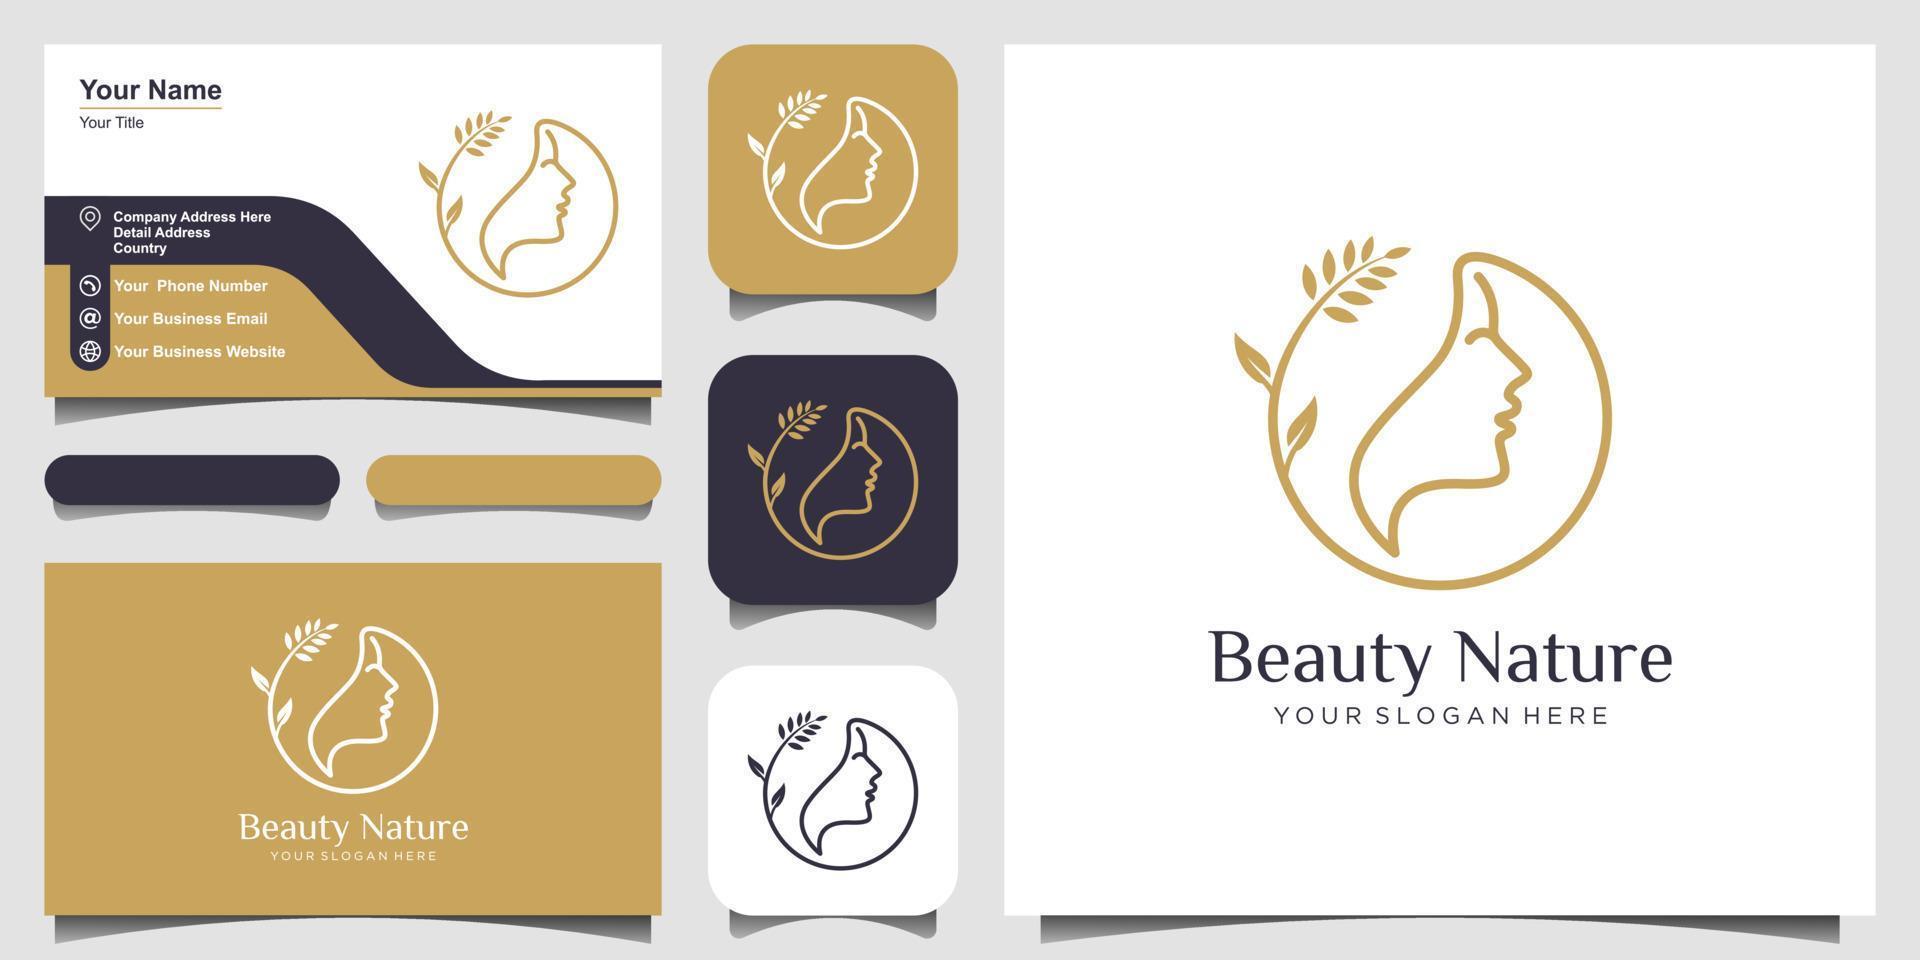 woman's face combine flower logo and business card design. Abstract design concept for beauty salon, fashion, massage, magazine, cosmetic and spa. vector